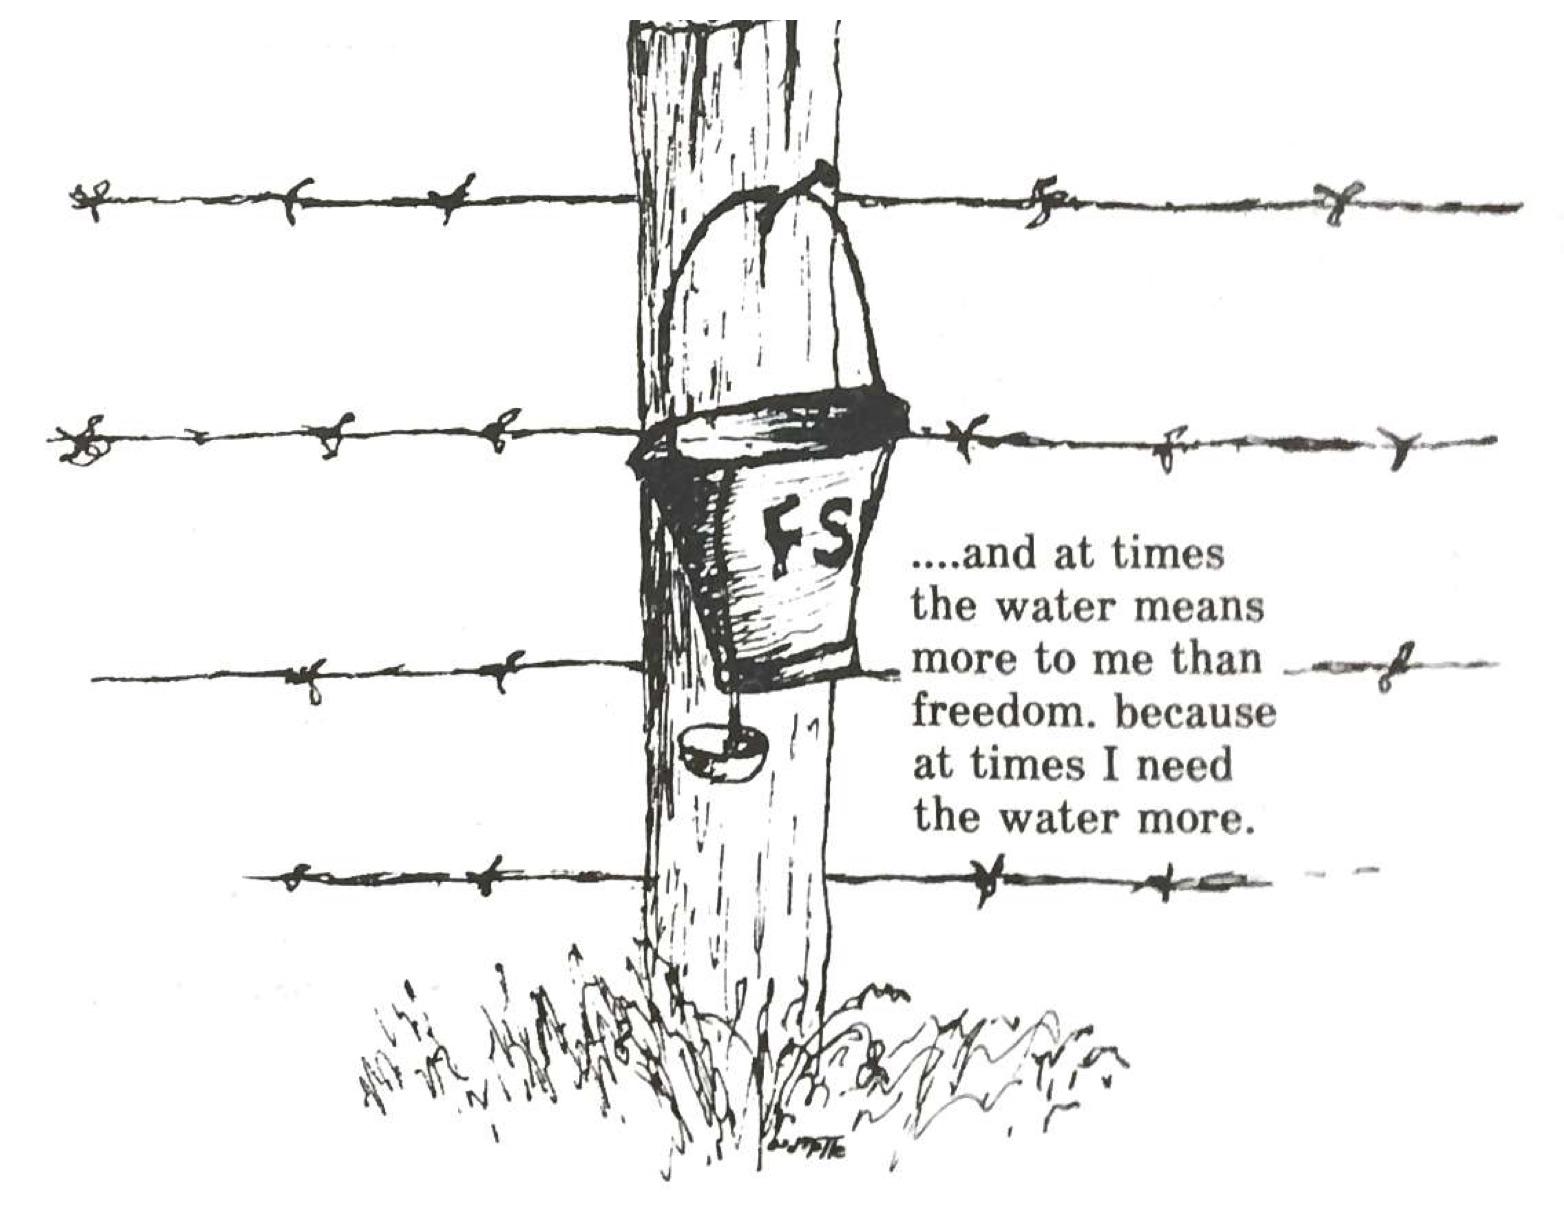 Slide 6: This is a cartoon from an inmate magazine, drawn in simple black lines. It shows a water bucket hanging from a fence post, and the bucket is labeled FSP for Florida State Prison.